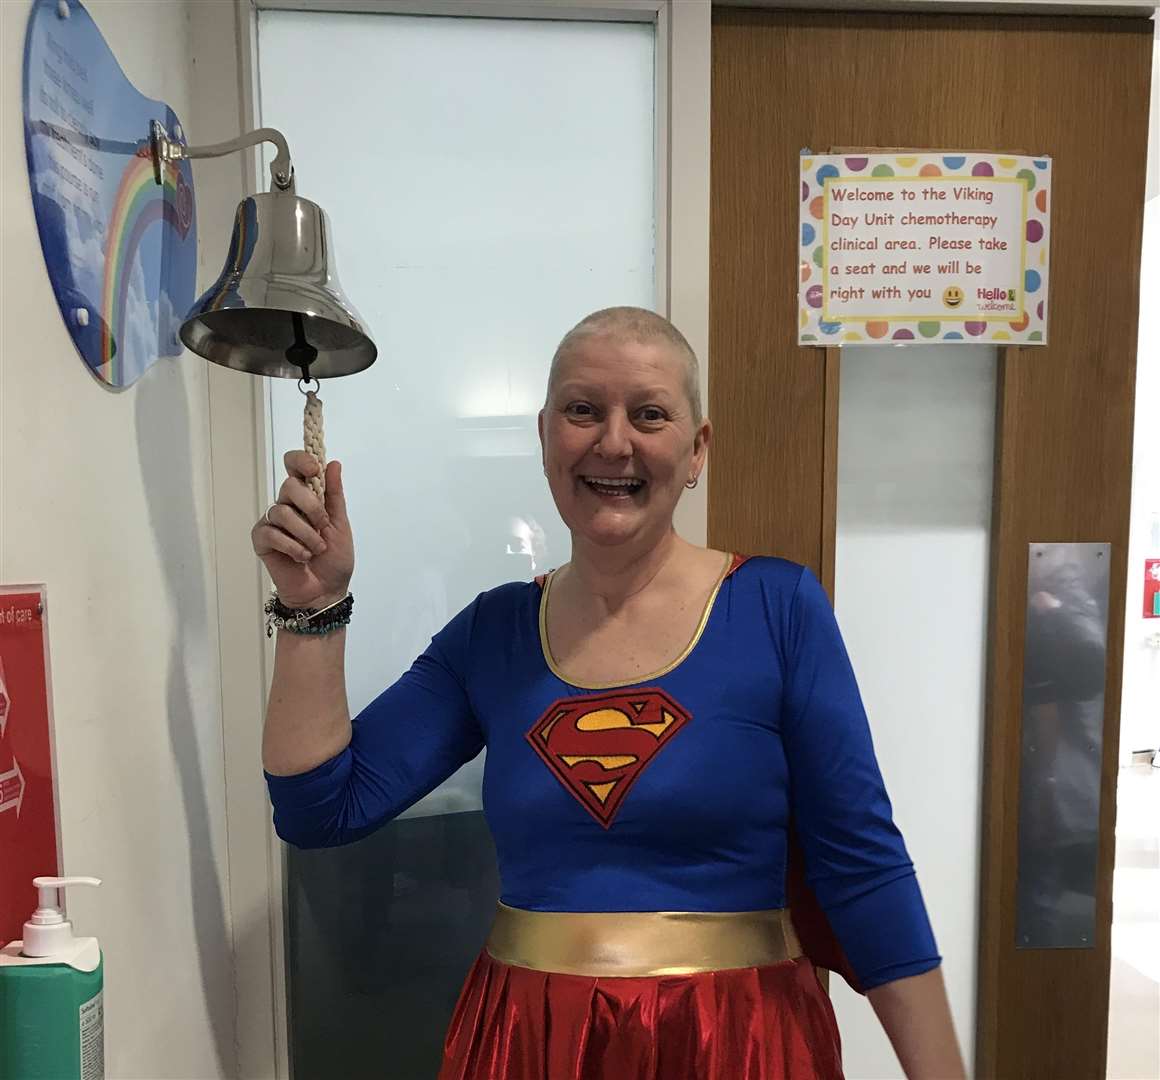 Shirley Ridge, from Birchington, rings the chemotherapy bell at the QEQM in Margate to mark the end of her breast cancer treatment. Picture: EKHUFT (7219117)